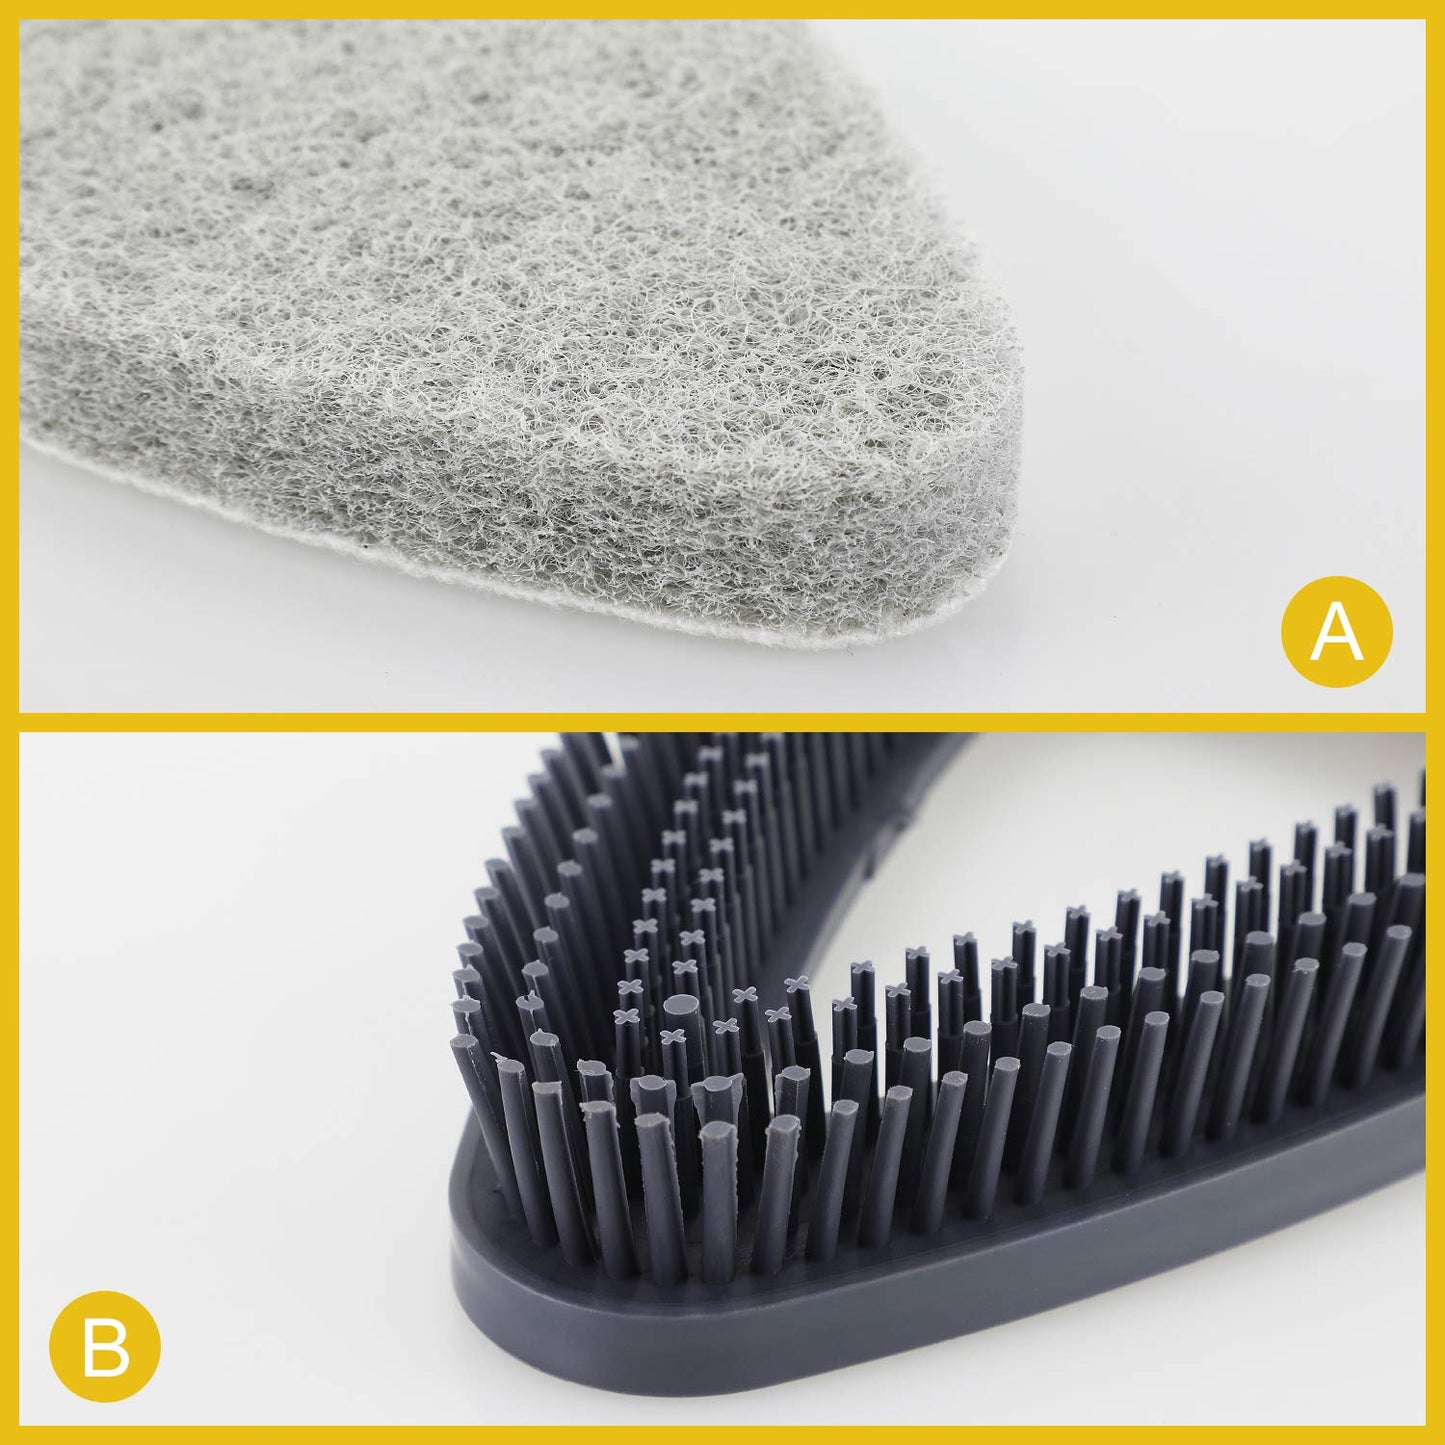 Tub Tile Scrubber Brush with 2 Scouring Pads 1 TPR Brush Head No Scratch for Cleaning Bathroom Kitchen Toilet Wall Tub Tile Sink